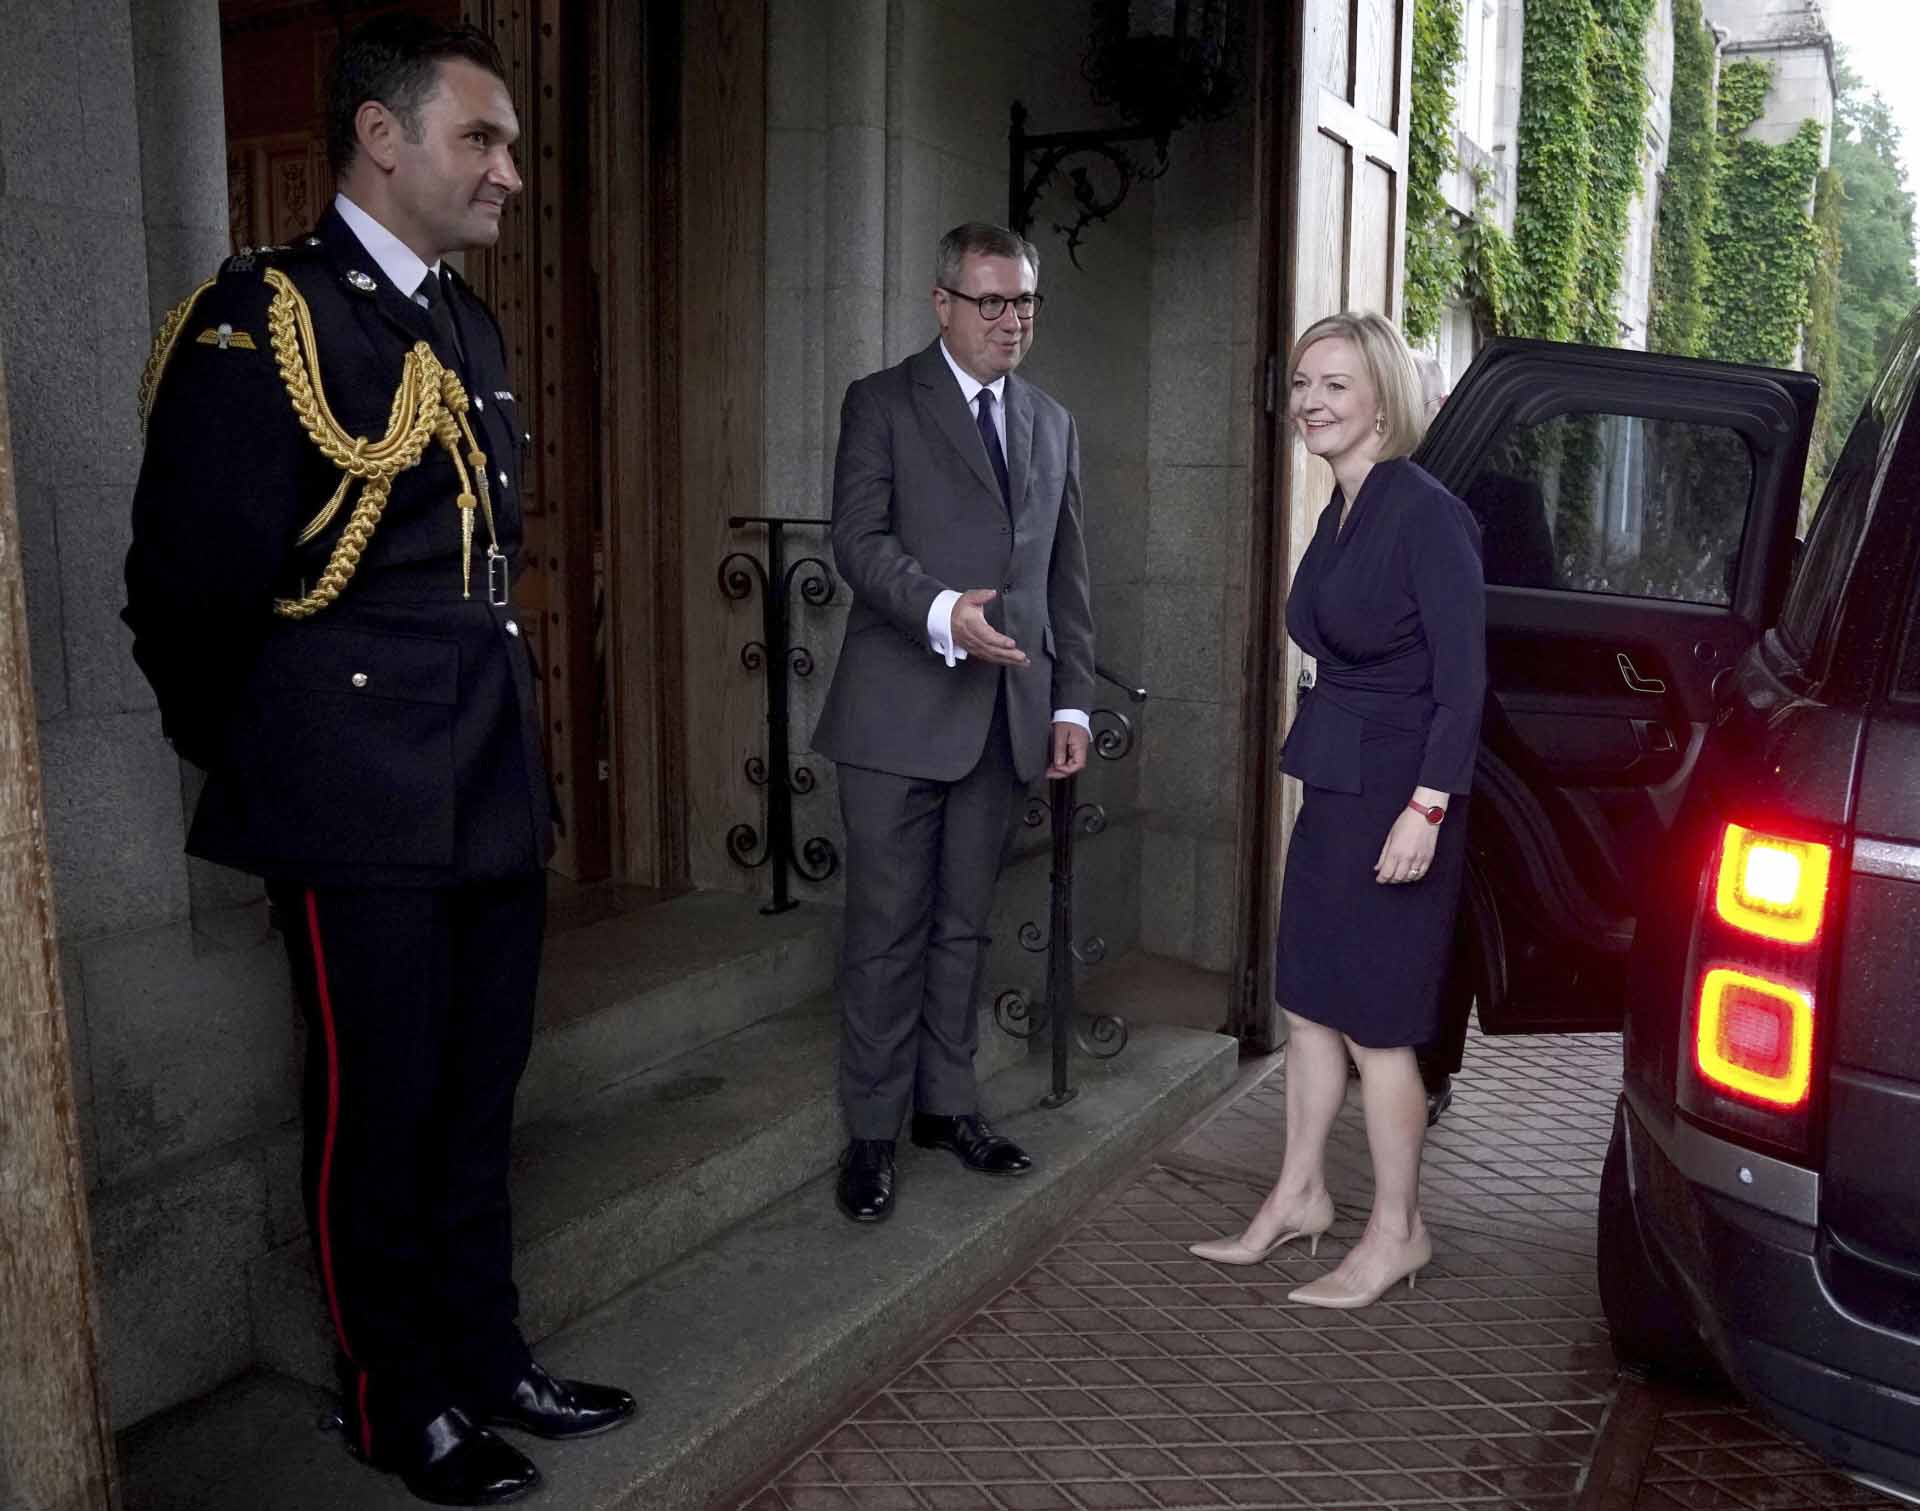 Liz Truss during an audience at Balmoral, Scotland, where she invited the newly elected leader of the Conservative party to become Prime Minister and form a new government, Tuesday, Sept. 6, 2022.